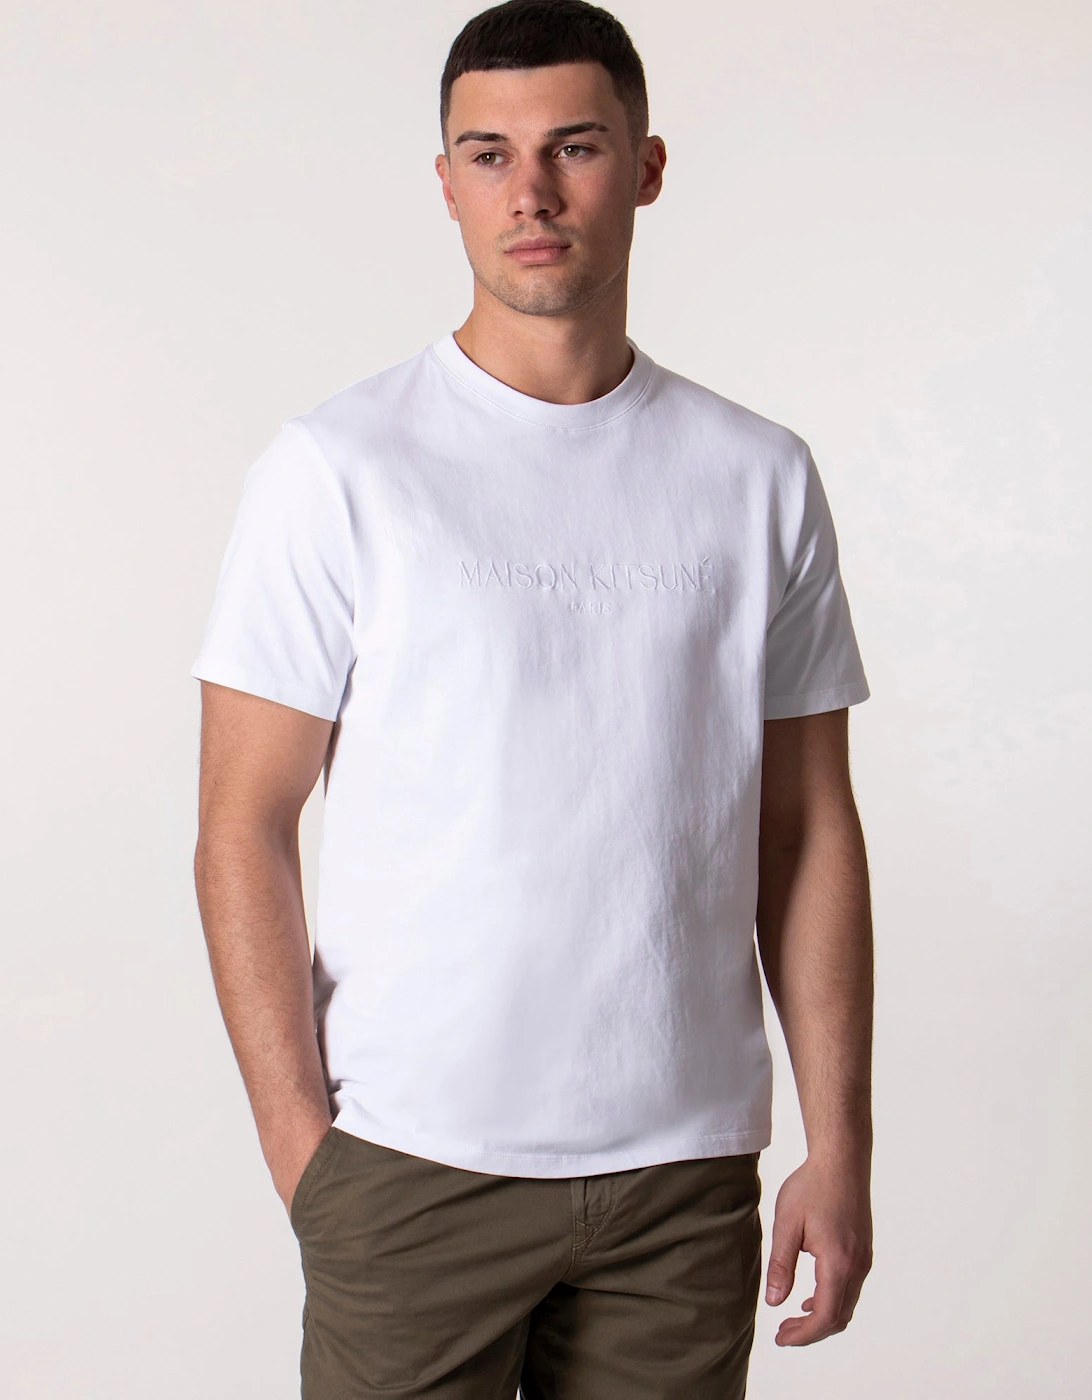 Men's Slim Fit Embroidery Classic T-Shirt - P100 Shirt White- [Size: XXL only]